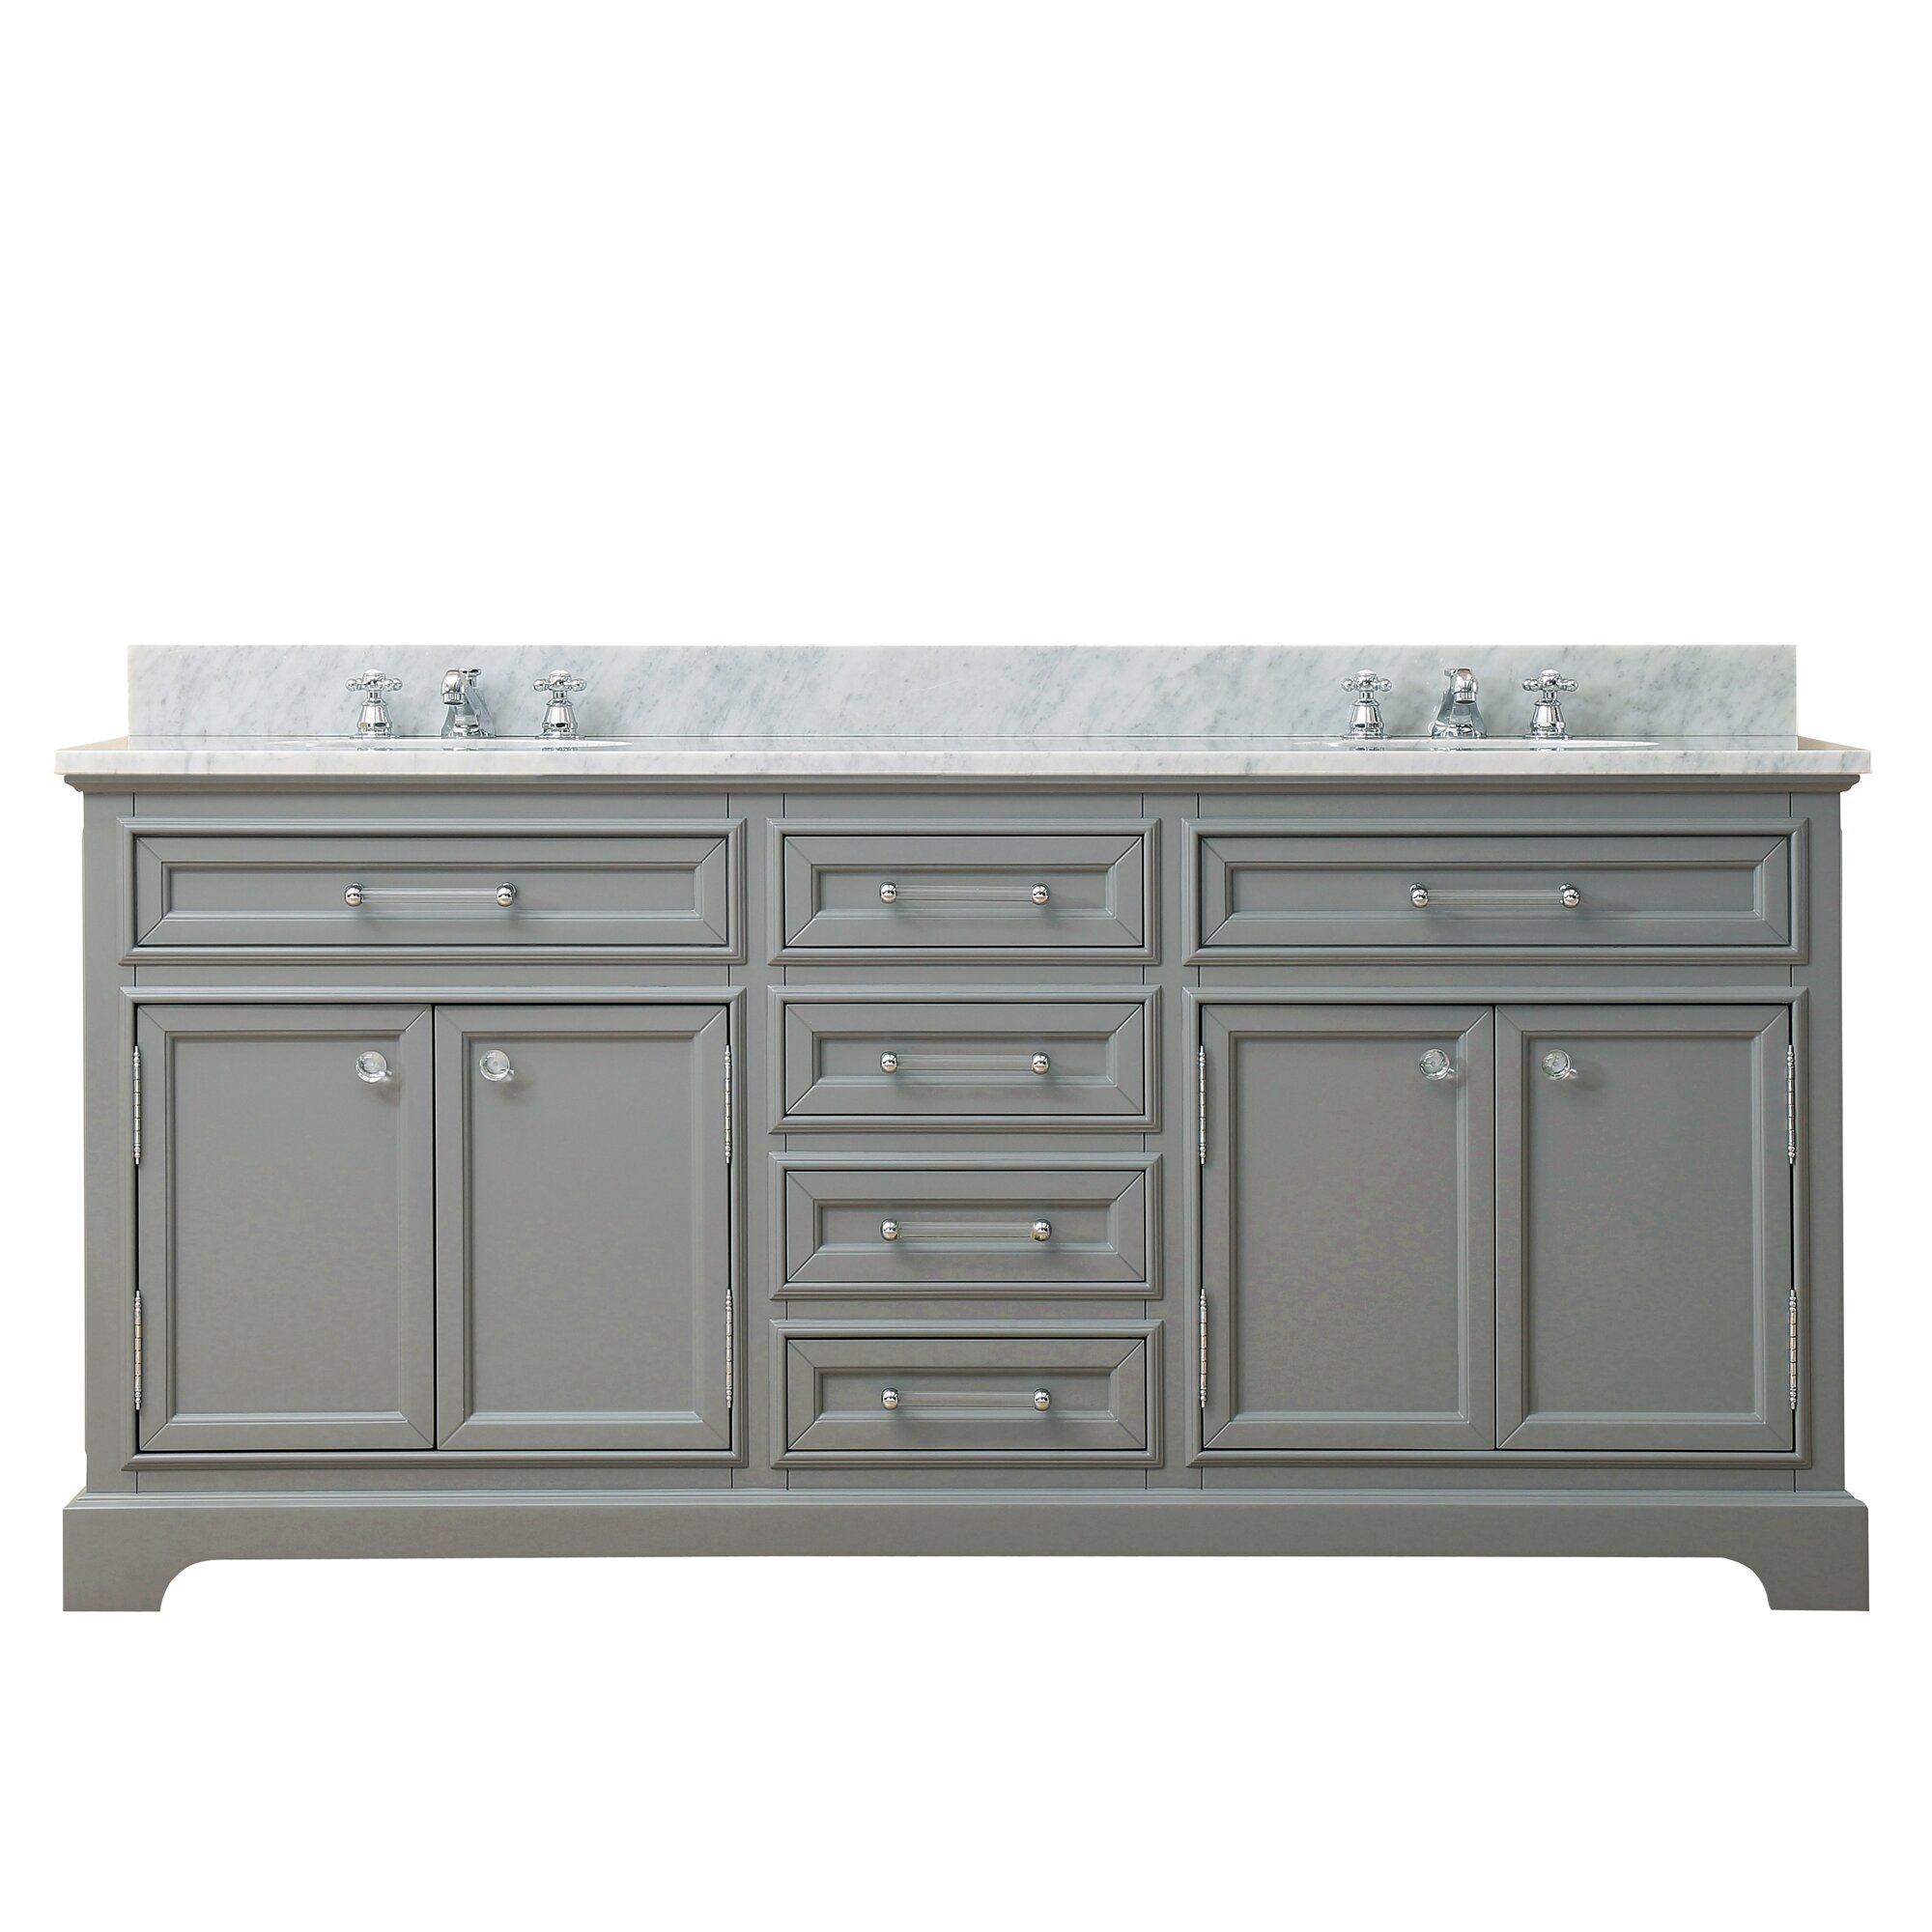 Darby Home Co Colchester 72 Double Sink Bathroom Vanity Set Grey And Reviews Wayfair 0575